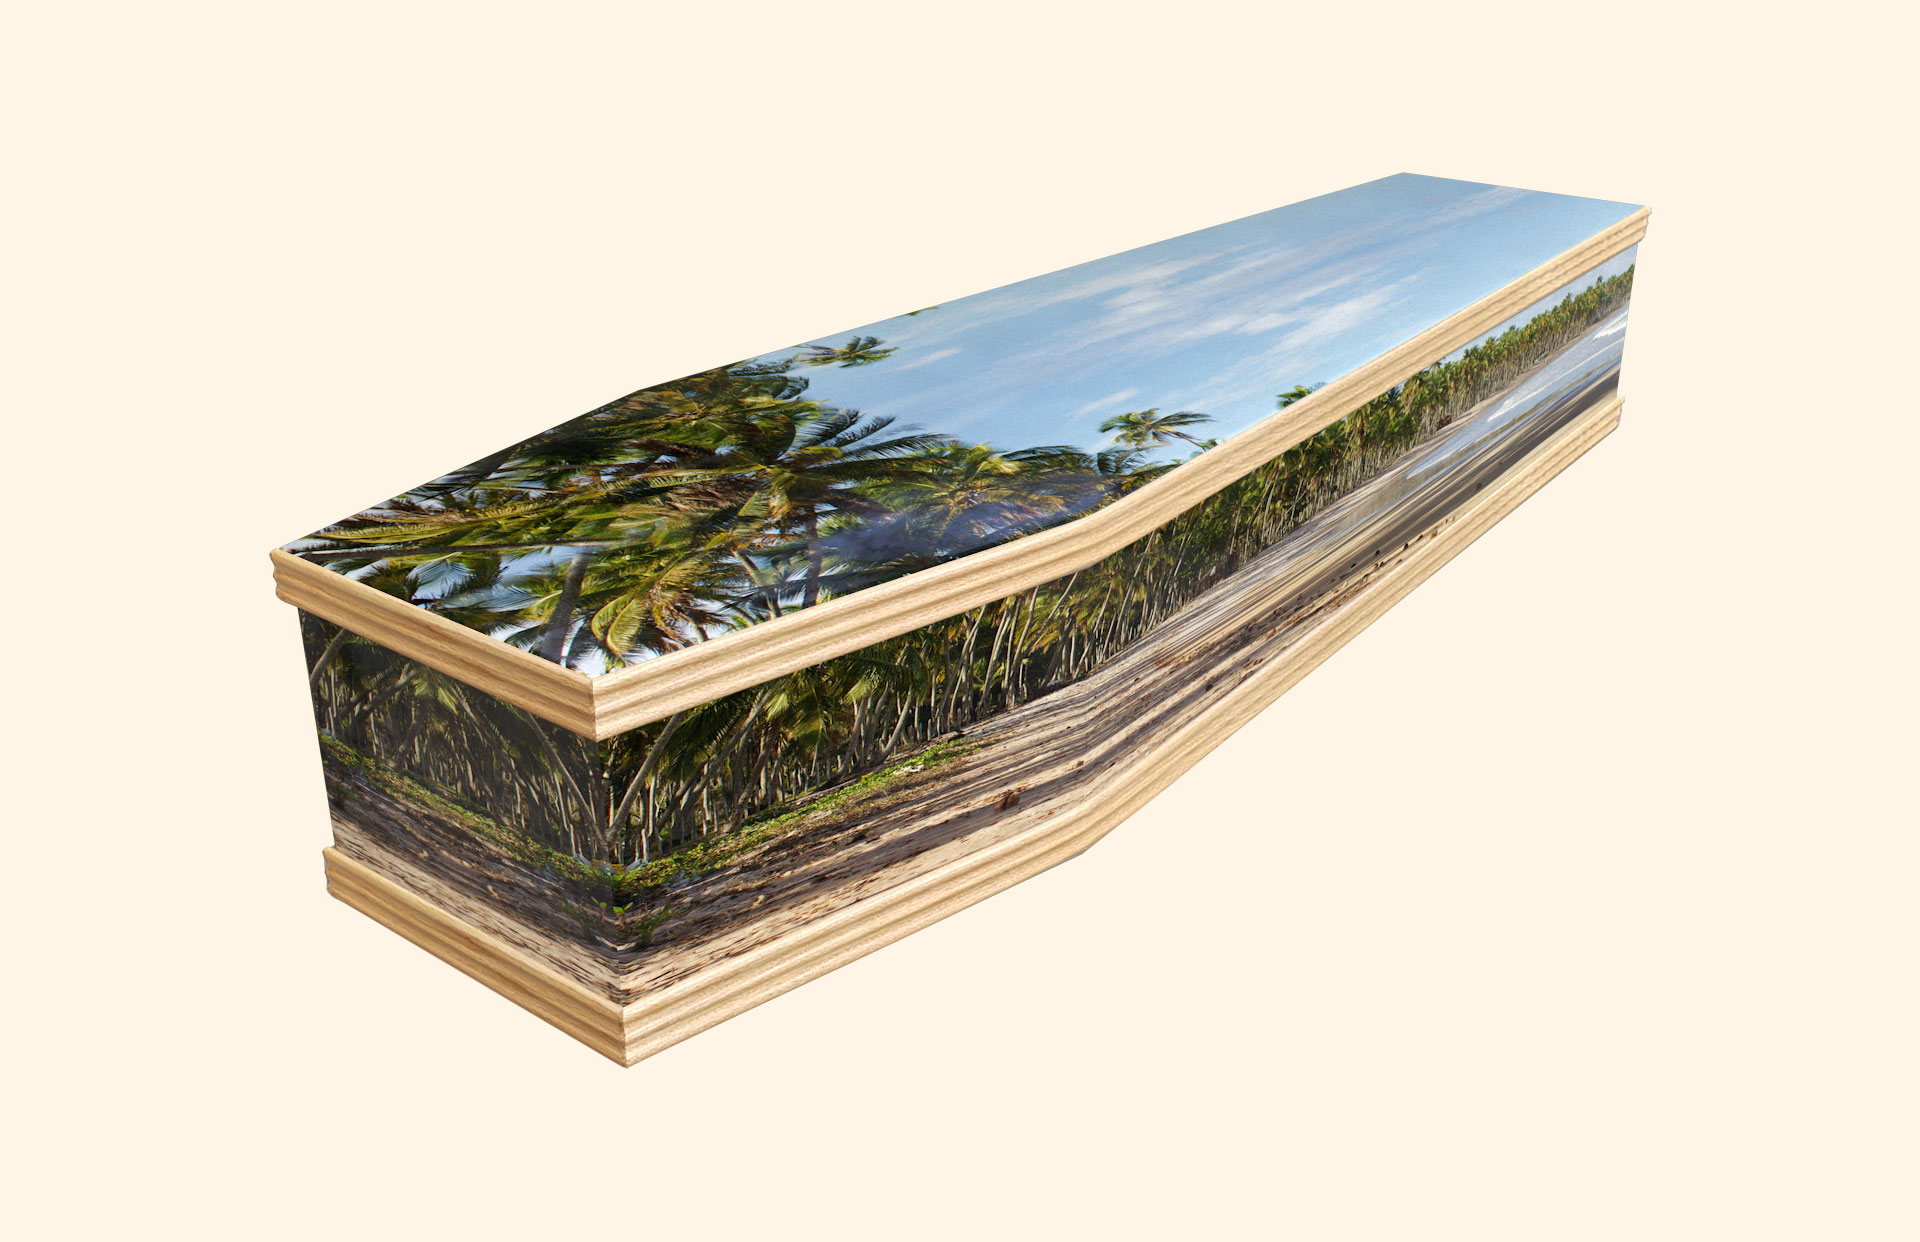 Paradise design on a classic coffin